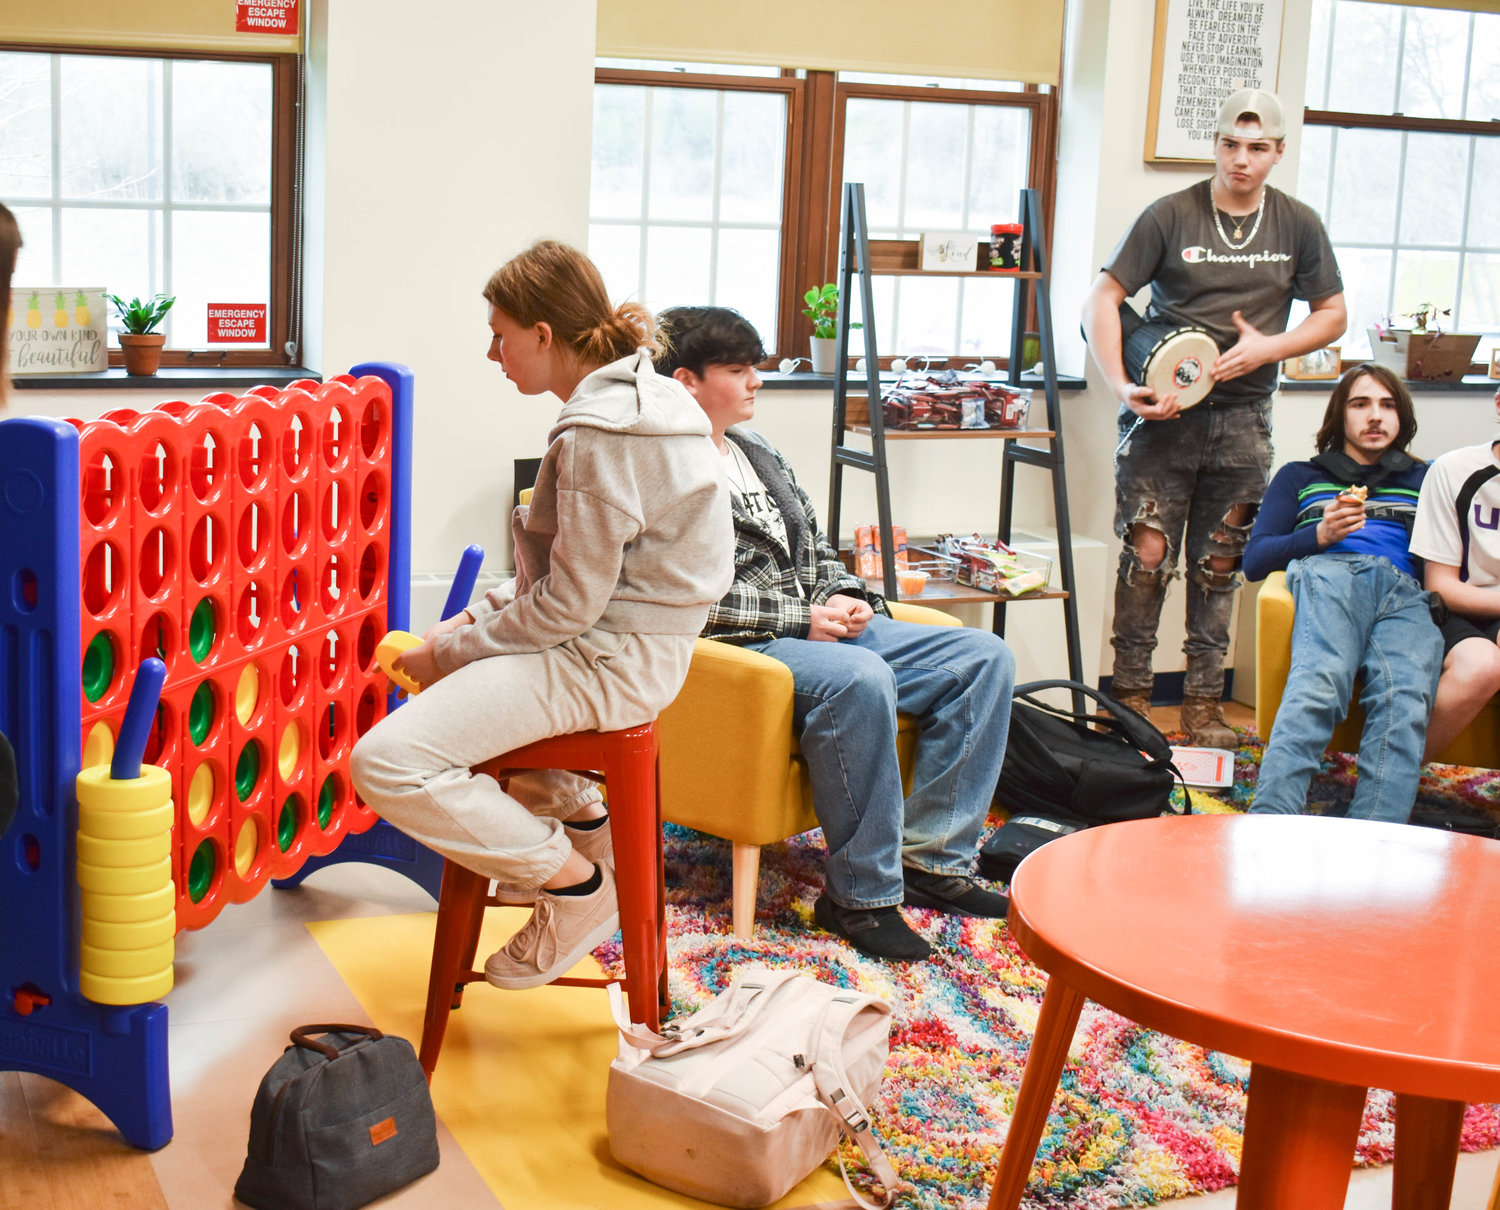 HUB — Students hang out in the CCS Hub where, according to program and district officials, students can play games, snacks, and more are available to all students.